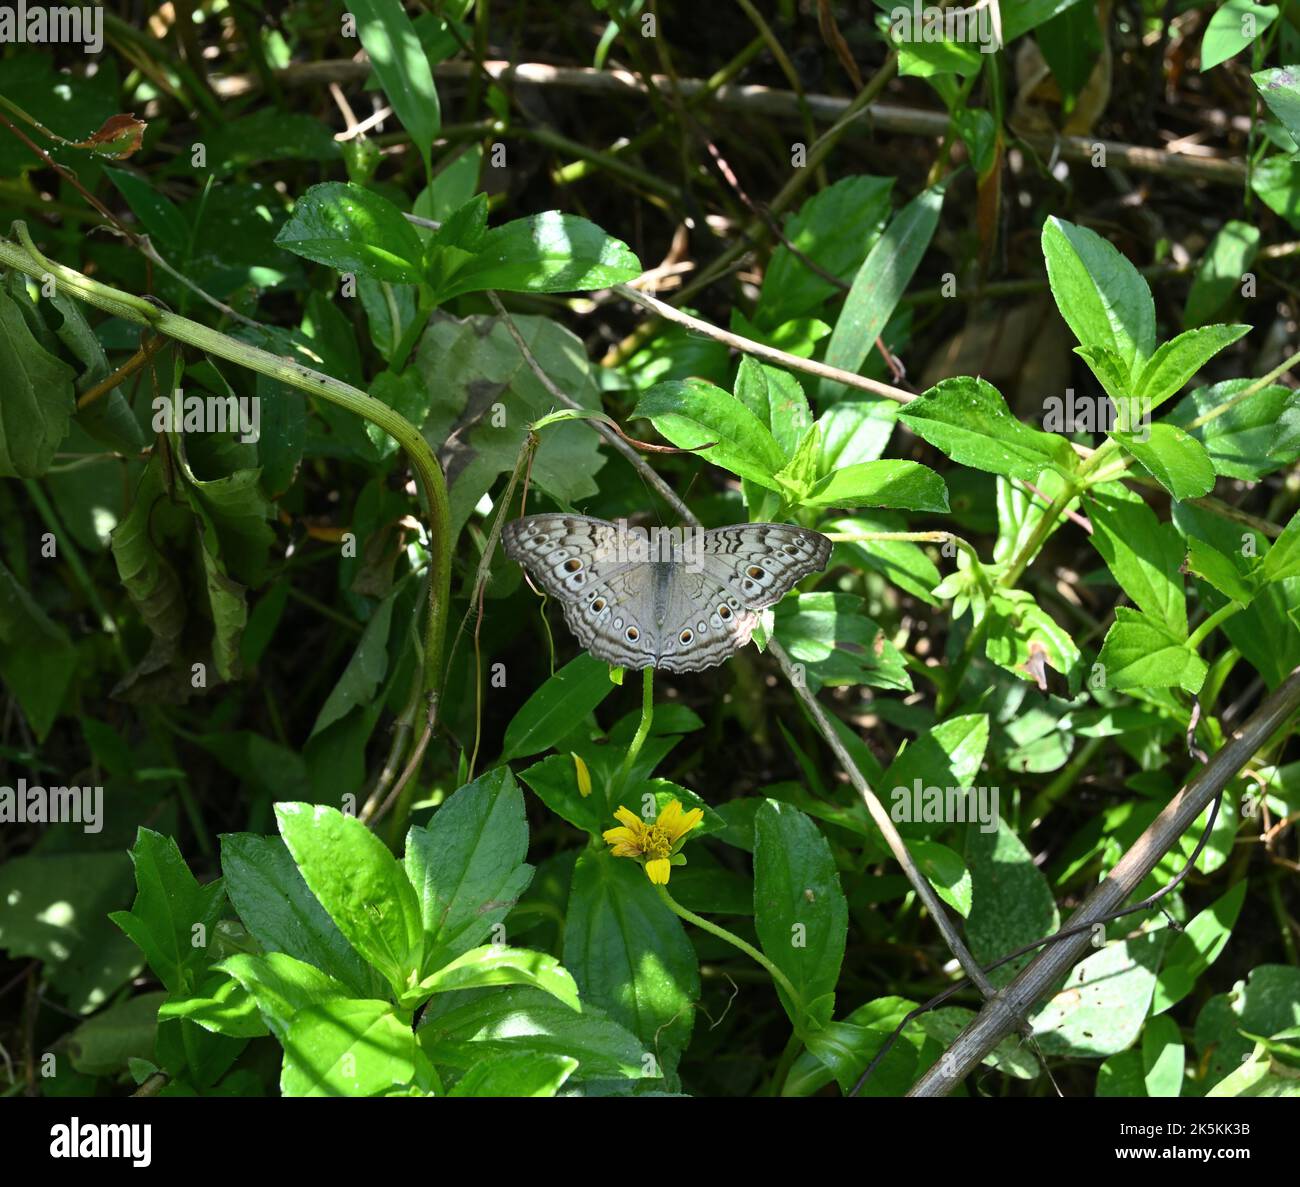 A Grey pansy butterfly spreading its wings on a Sphagneticola Trilobata flower in a wild area Stock Photo